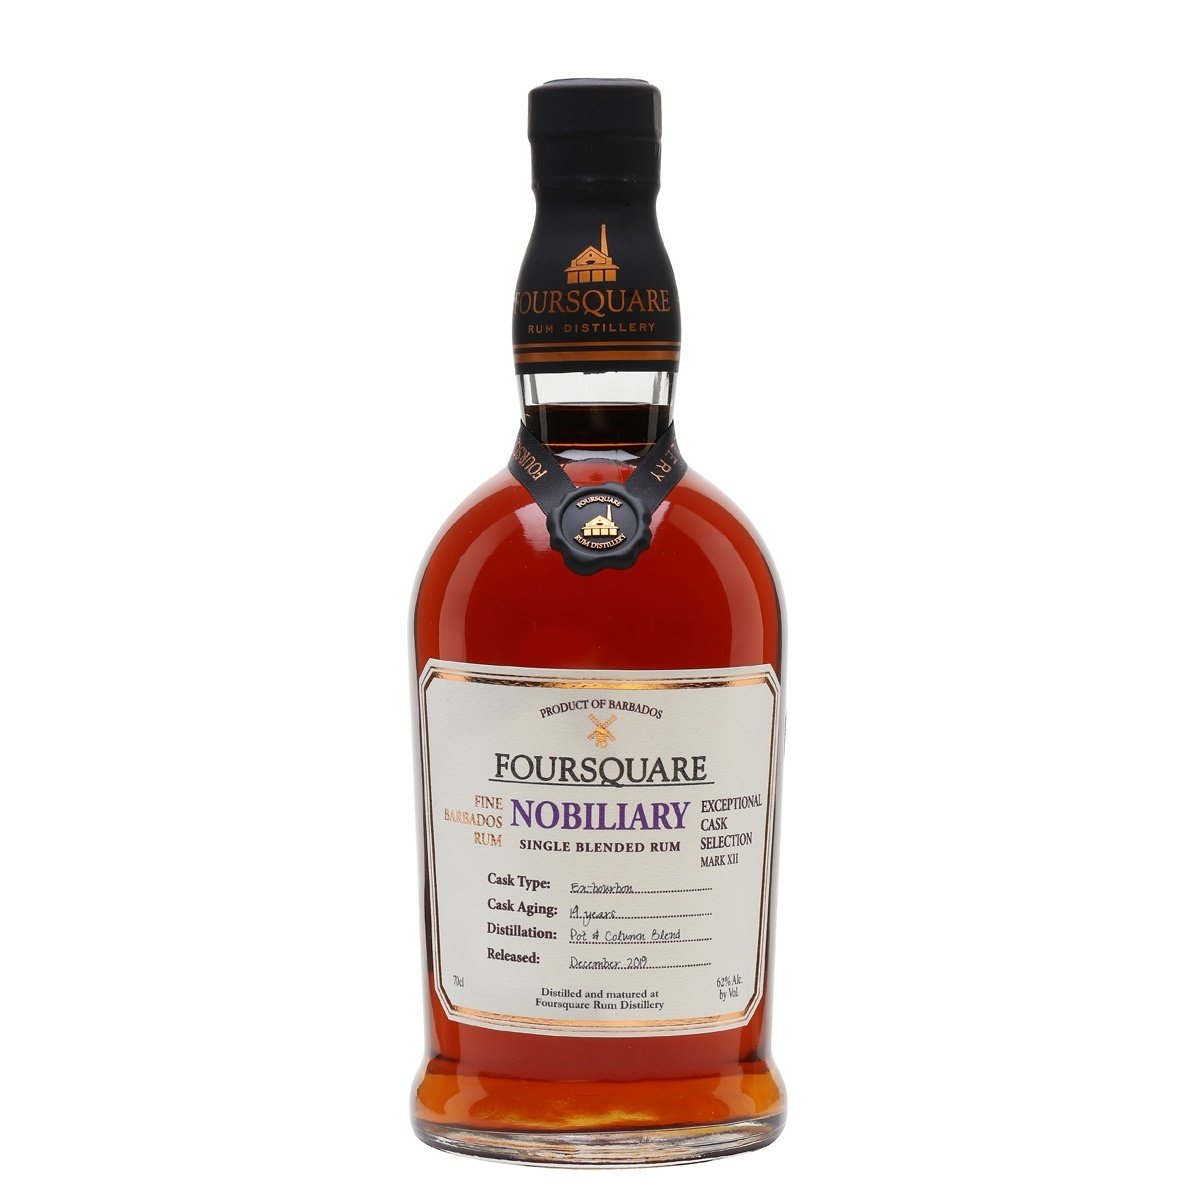 Foursquare Distillery Mark XII "Nobiliary" 14 Year Old Exceptional Cask Selection Single Blended Rum 750ml